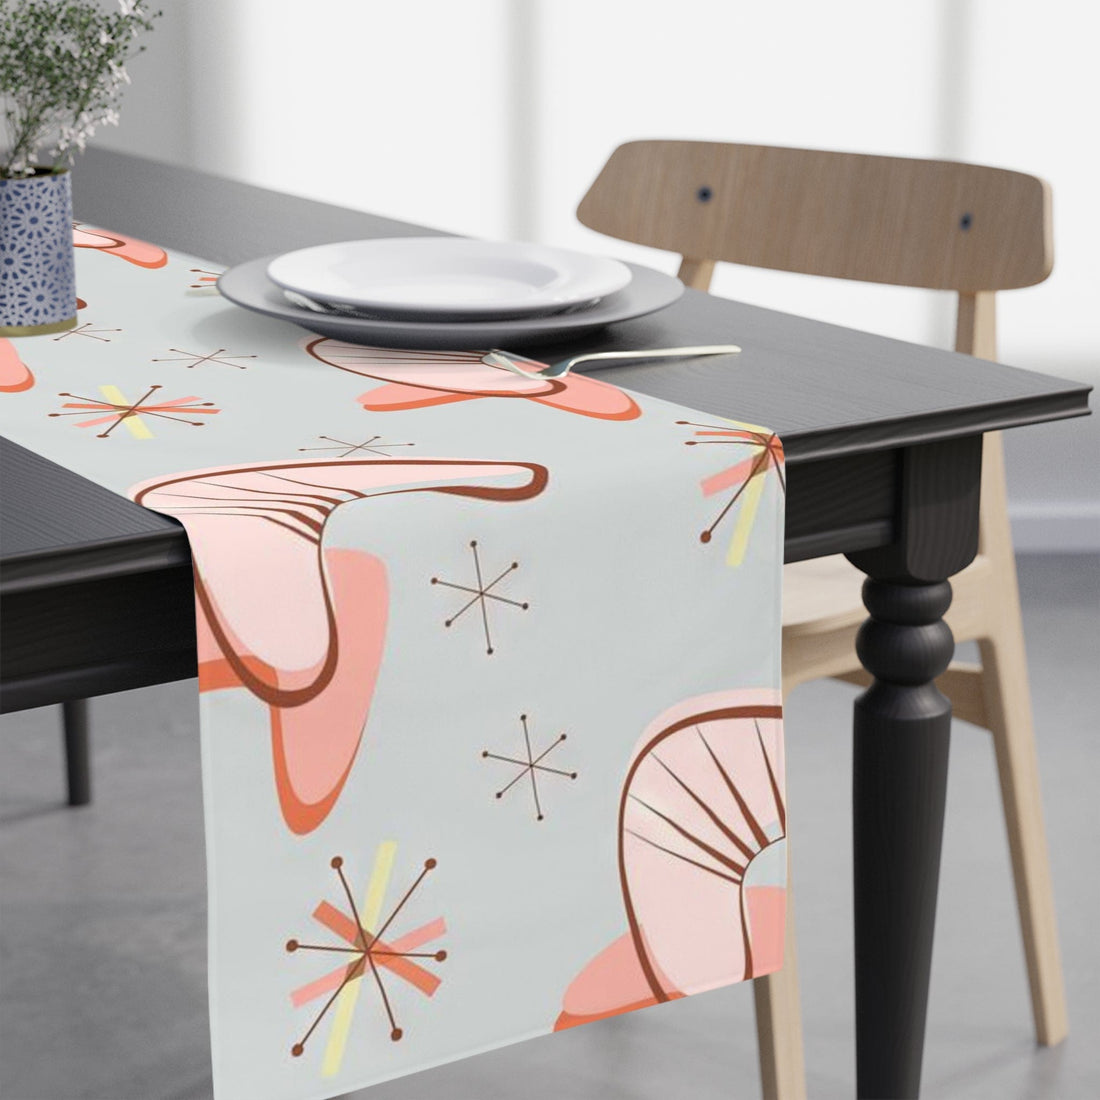 Kate McEnroe New York Retro Mid Mod Atomic Boomerang Starbursts Table Runner, MCM Blue, Coral Table Linens, 1950s Vintage Kitchen DecorTable Runners23855777557876160500